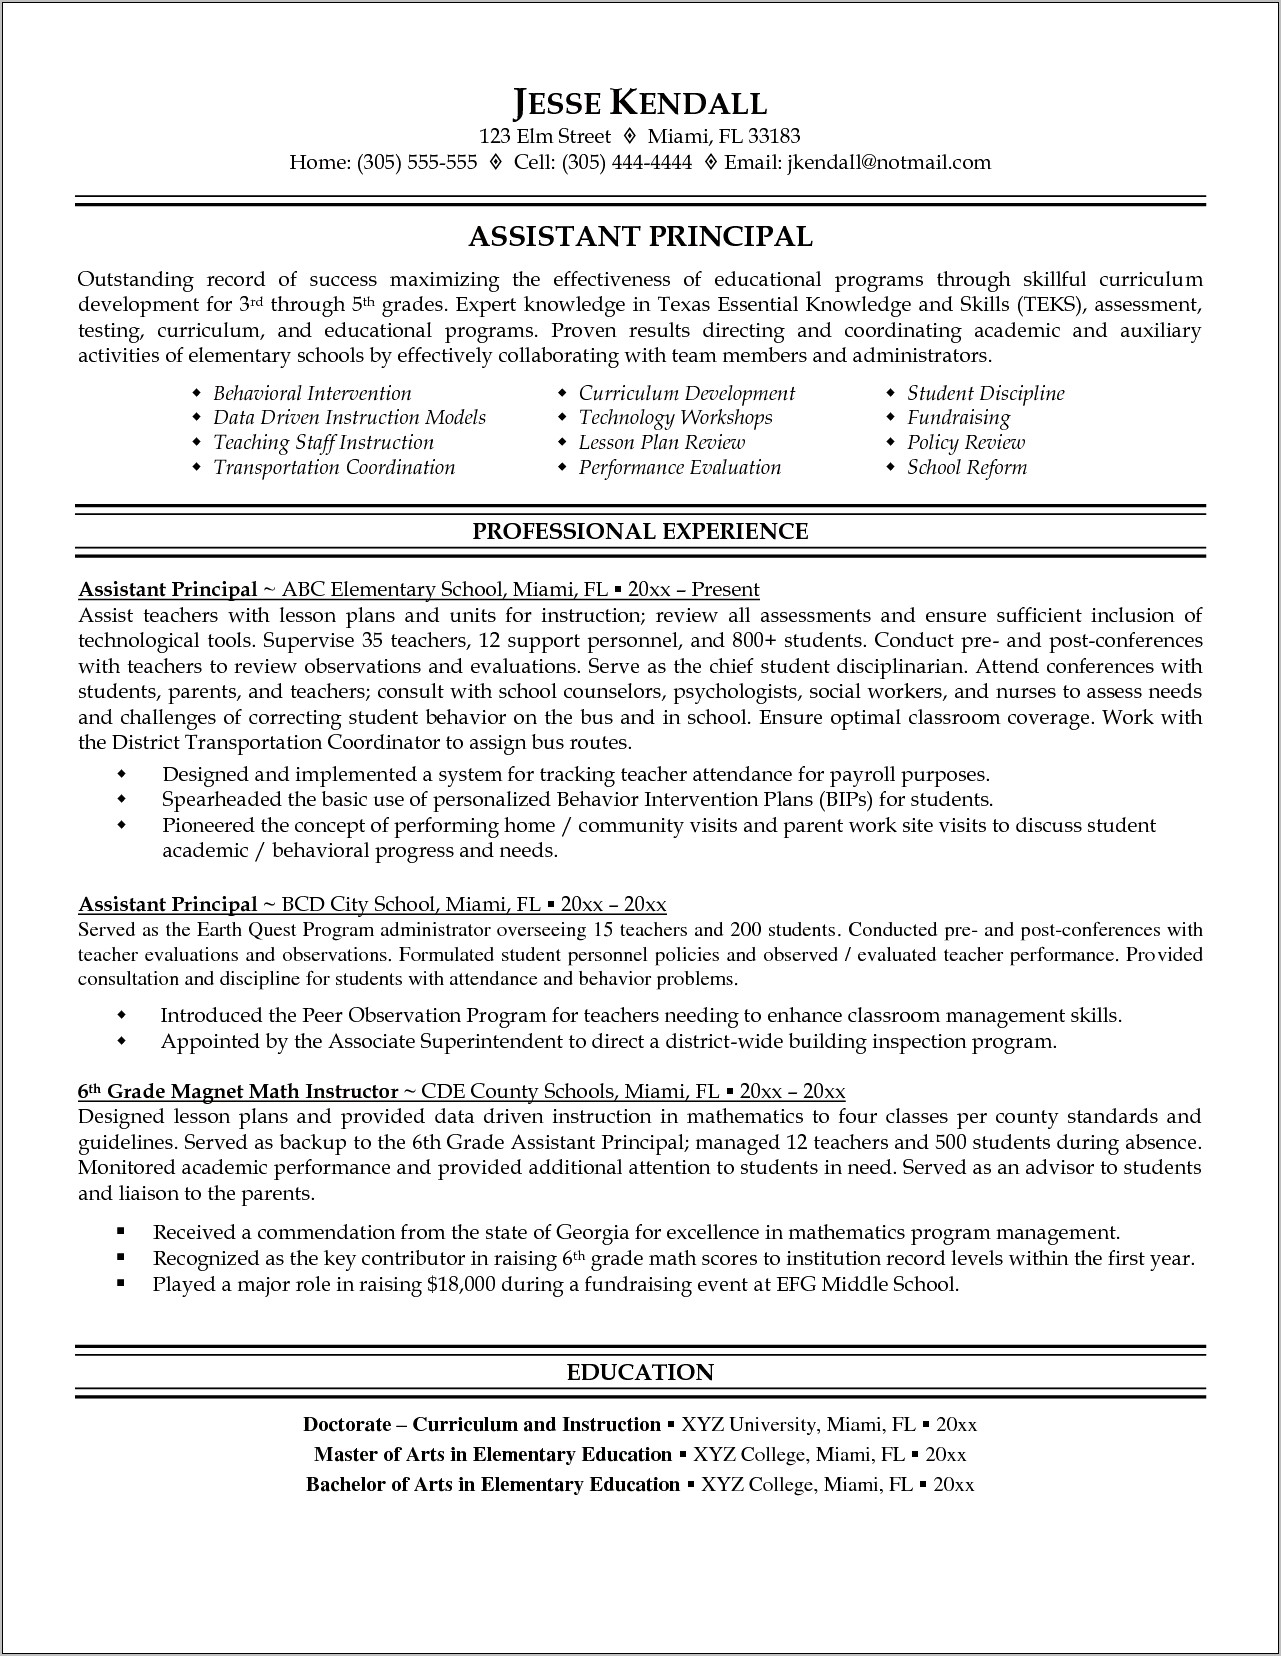 Assistant Principal Resume Objective Statement